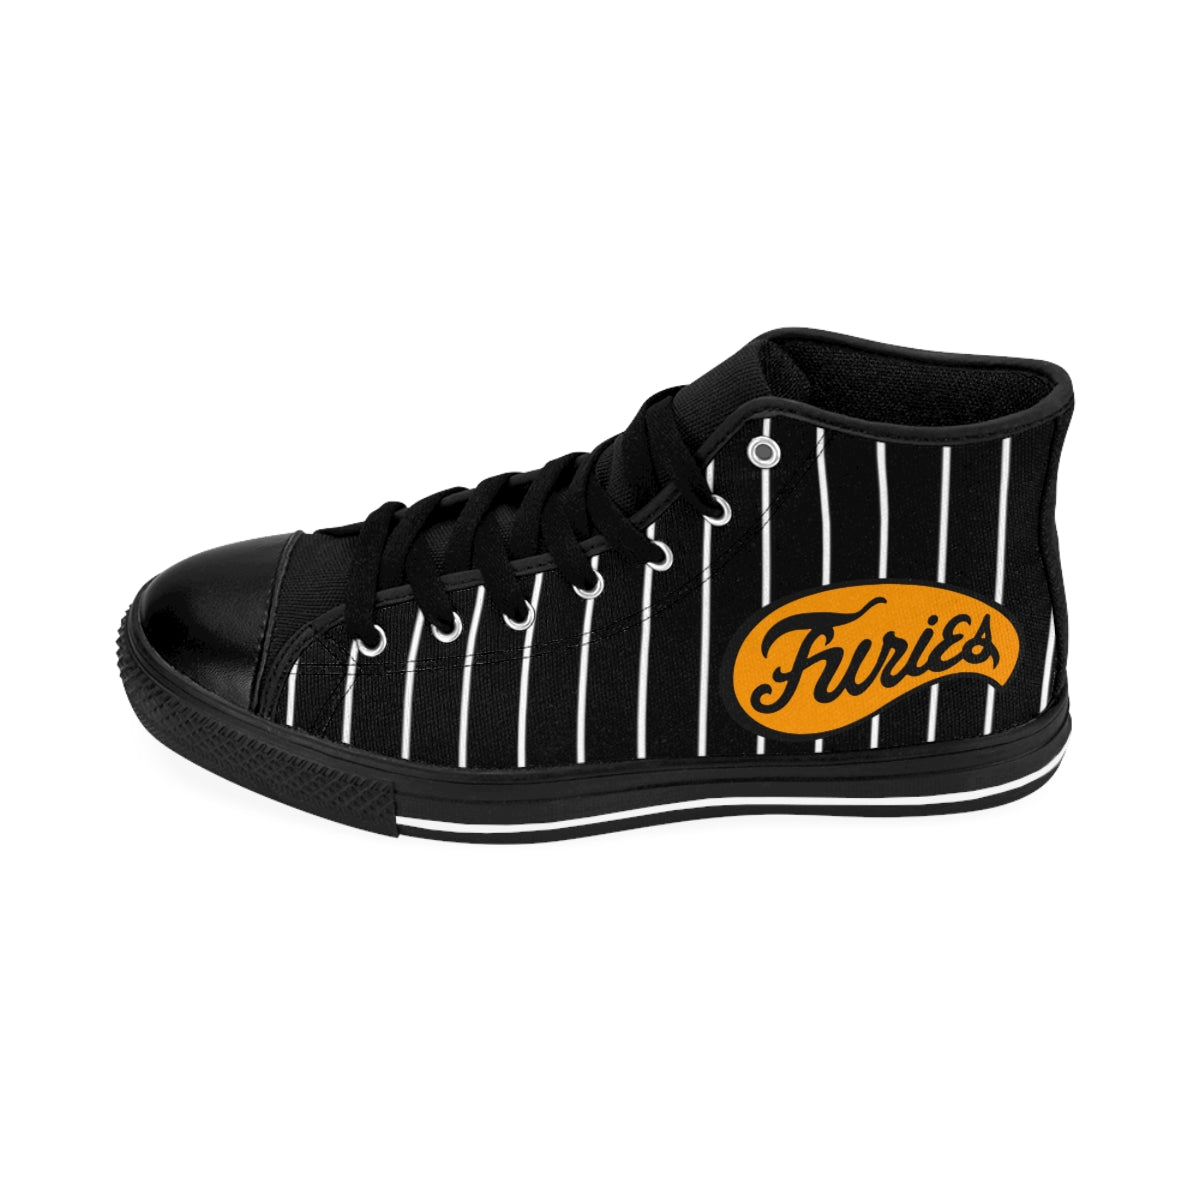 Baseball Furies - The Warriors Shoes | Black High-top Sneakers